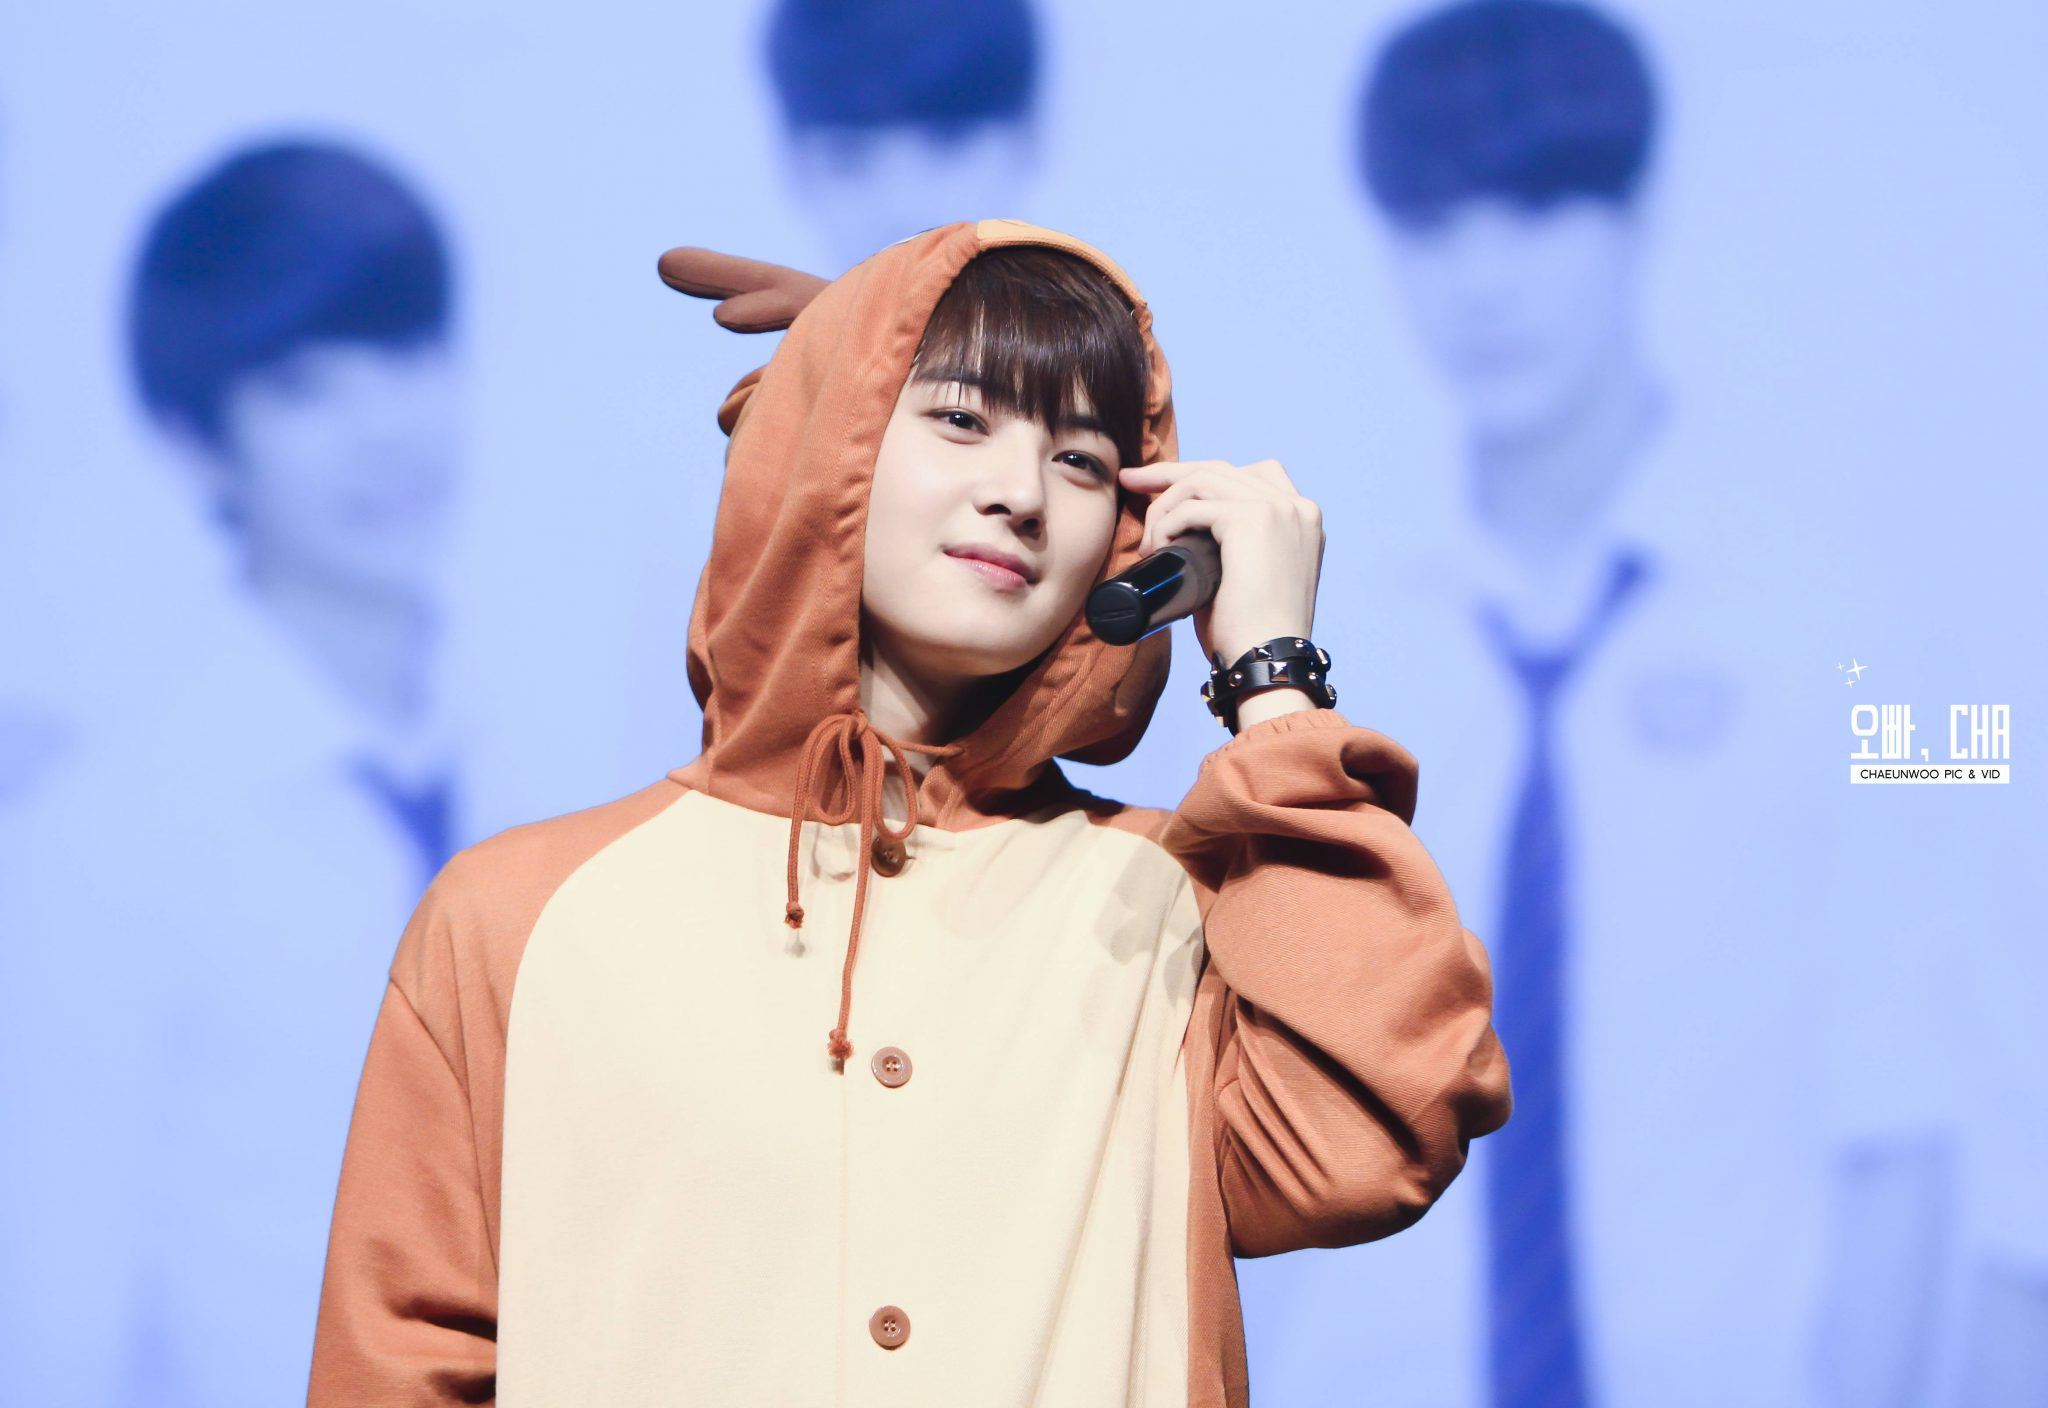 Just 51 Photos of ASTRO Cha Eunwoo That You Need In Your Day - Koreaboo